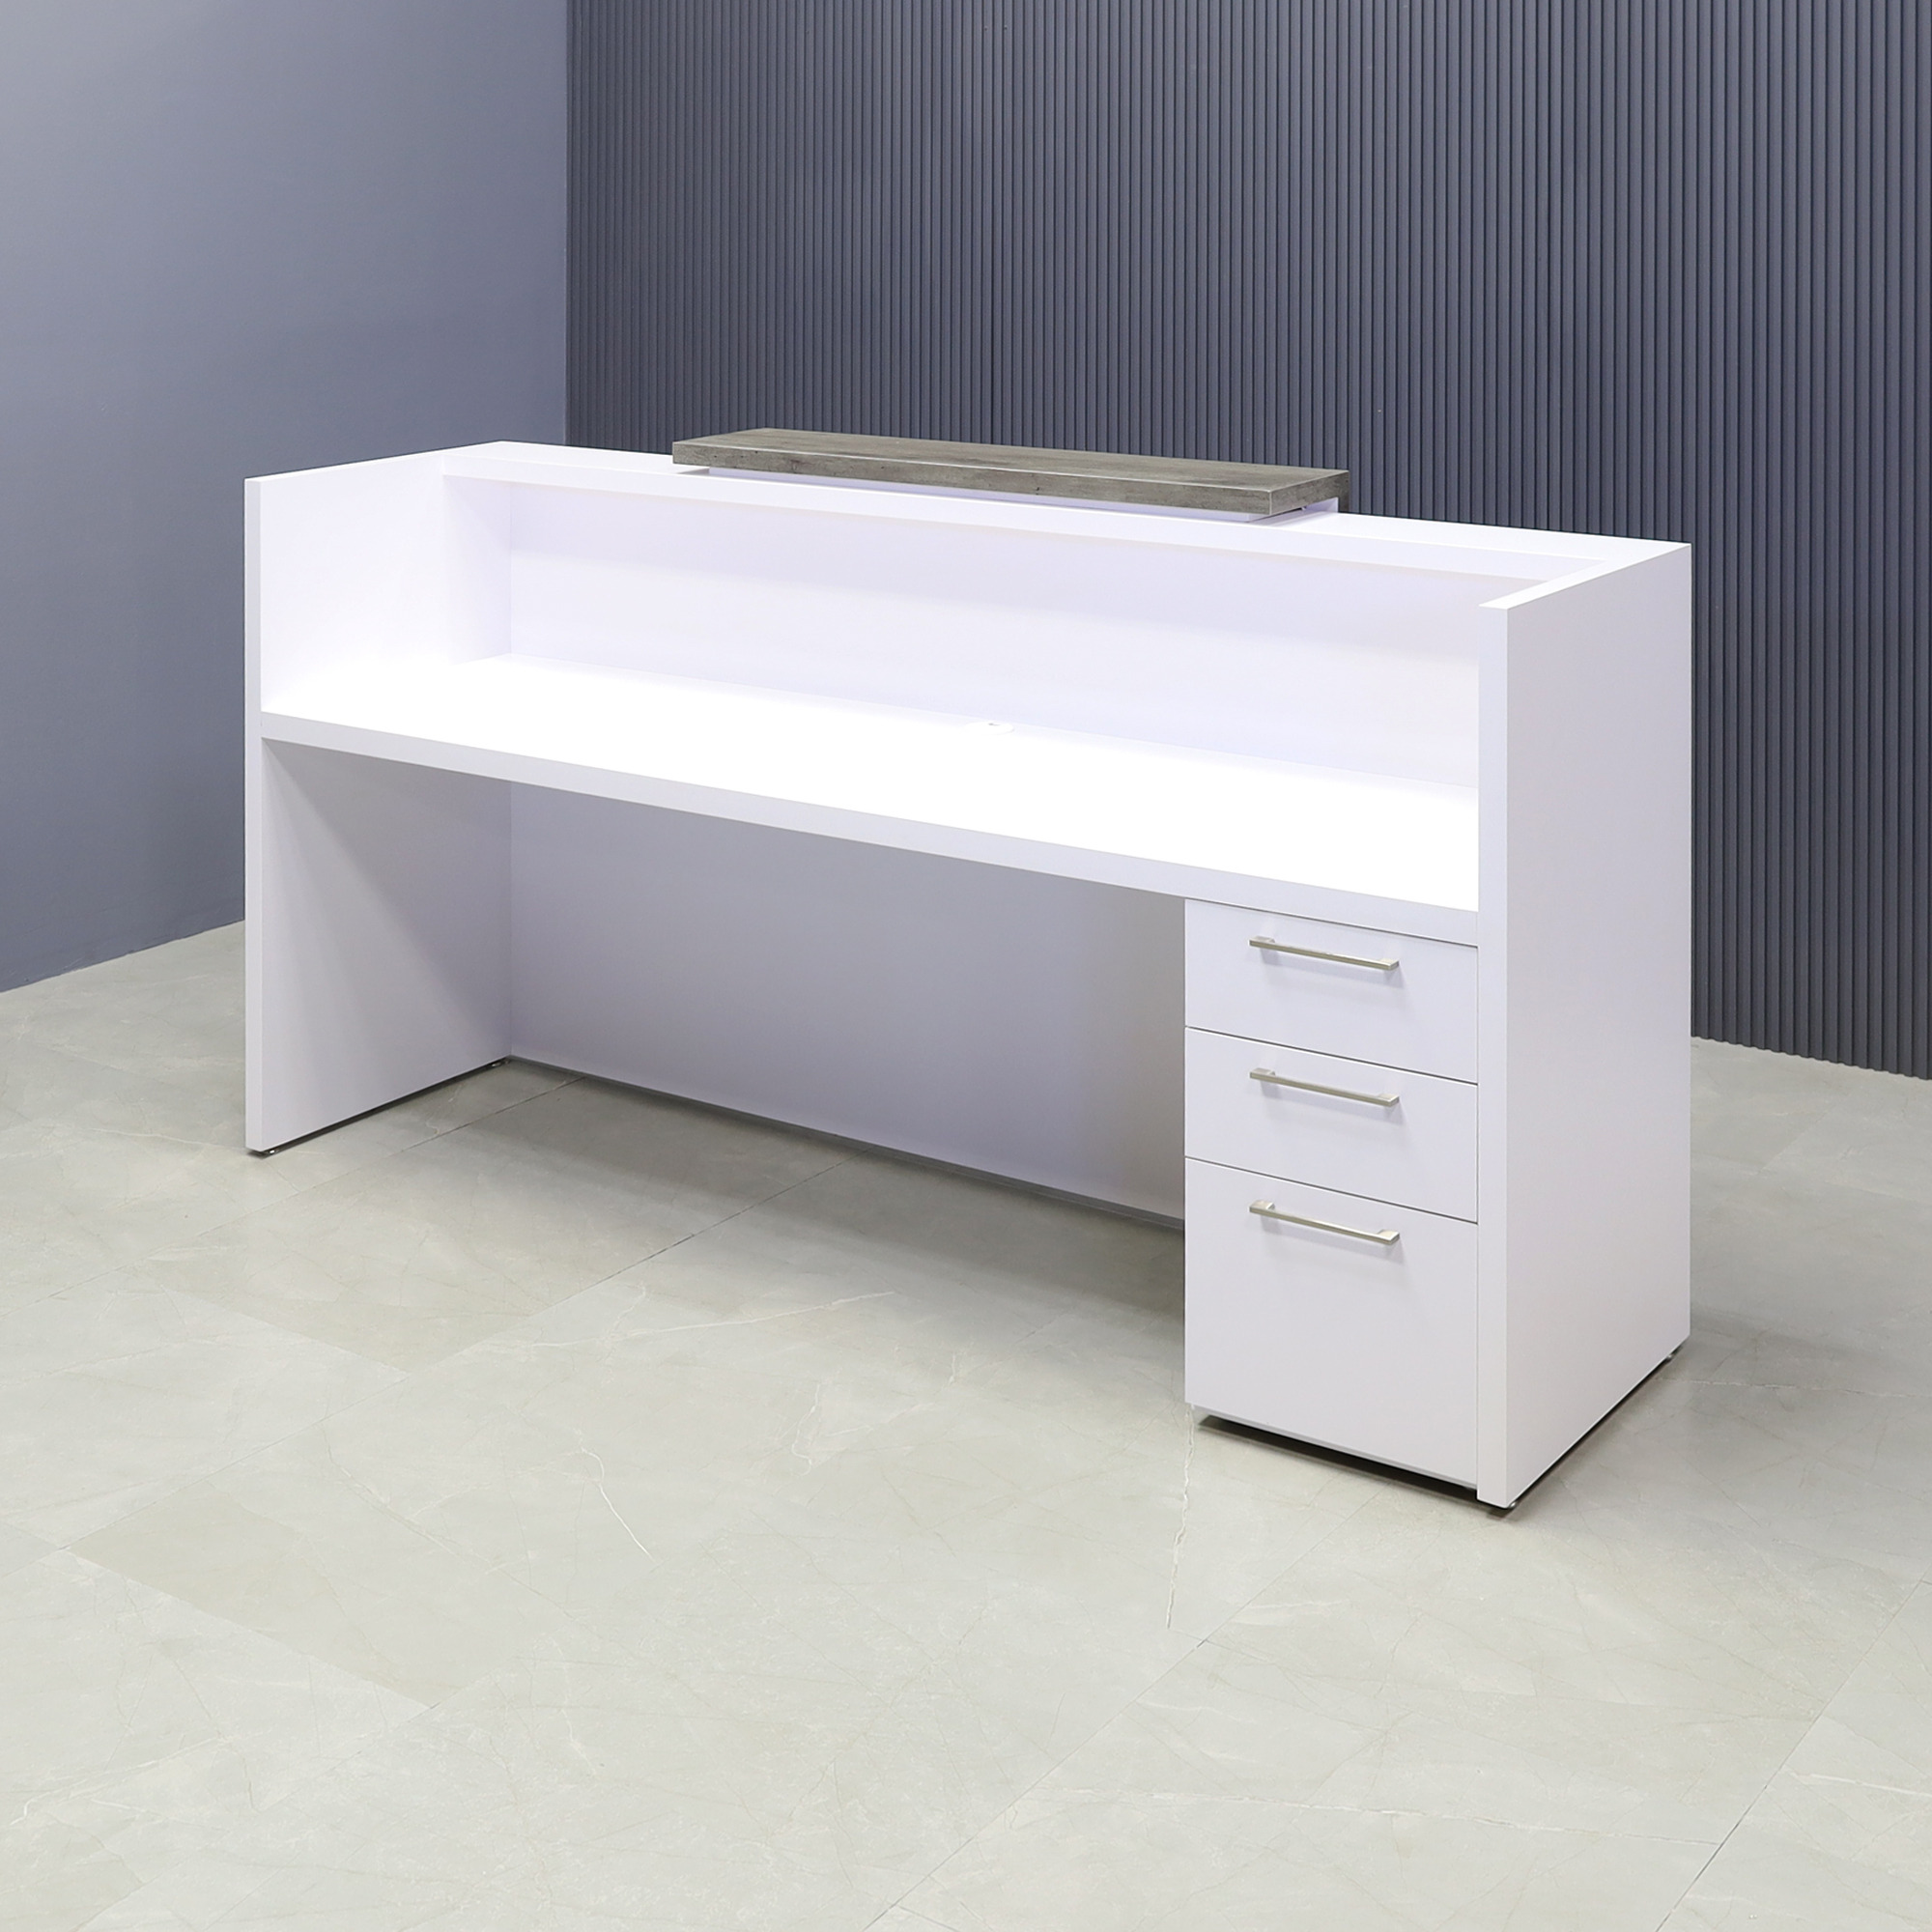 84-inch Chicago Custom Reception Desk in metropolitan concrete PVC counter and white matte laminate desk, with color LED, and built-in storage on right side, shown here.